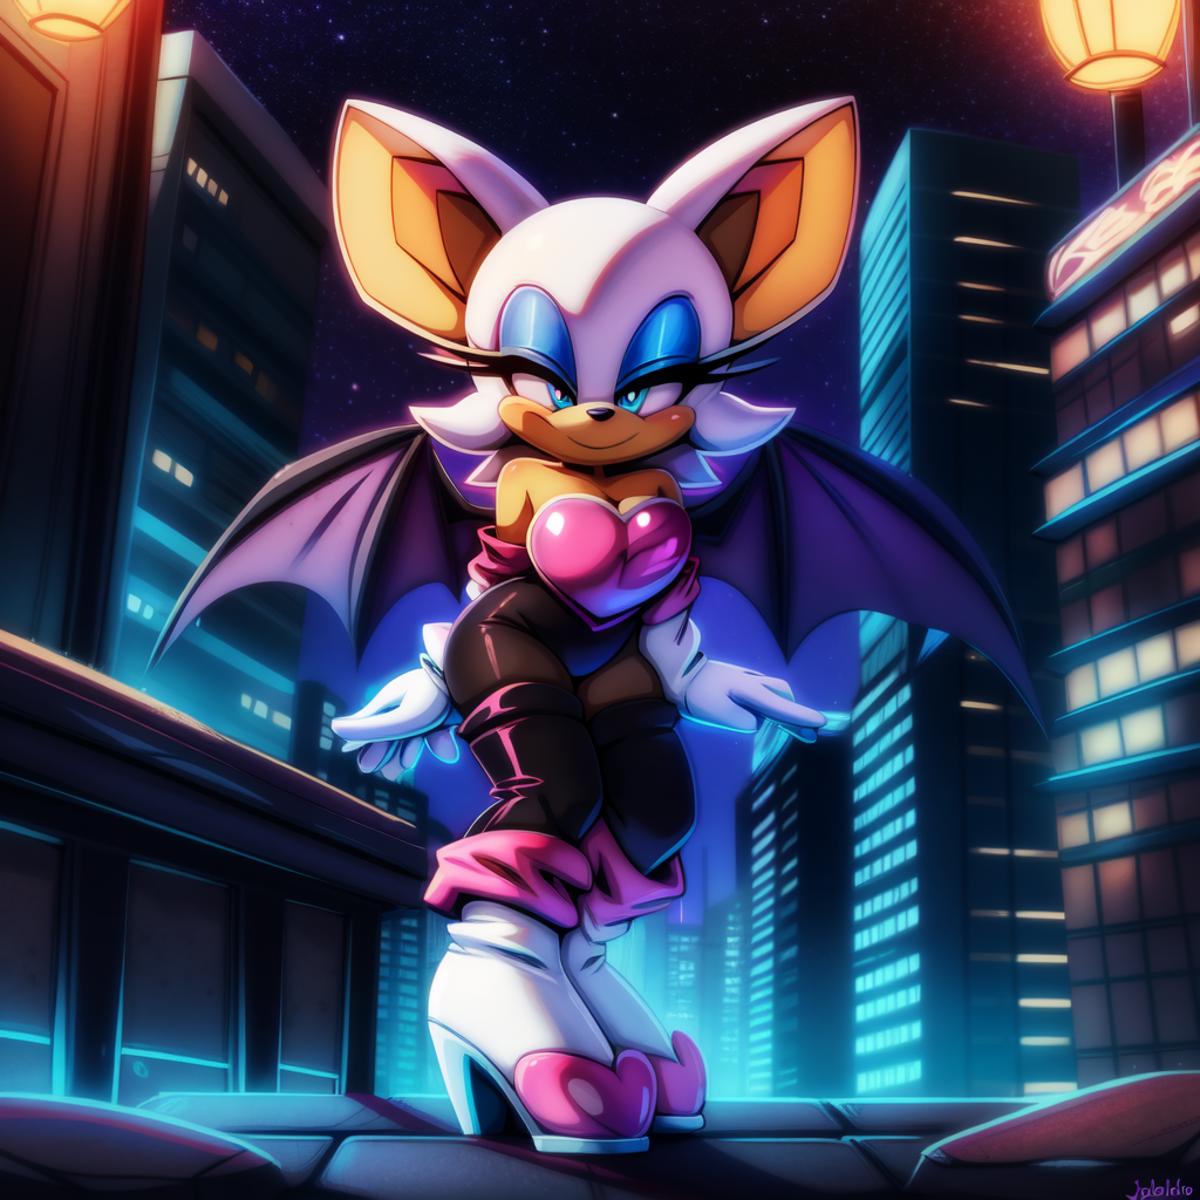 Rouge The Bat image by Aigenerater